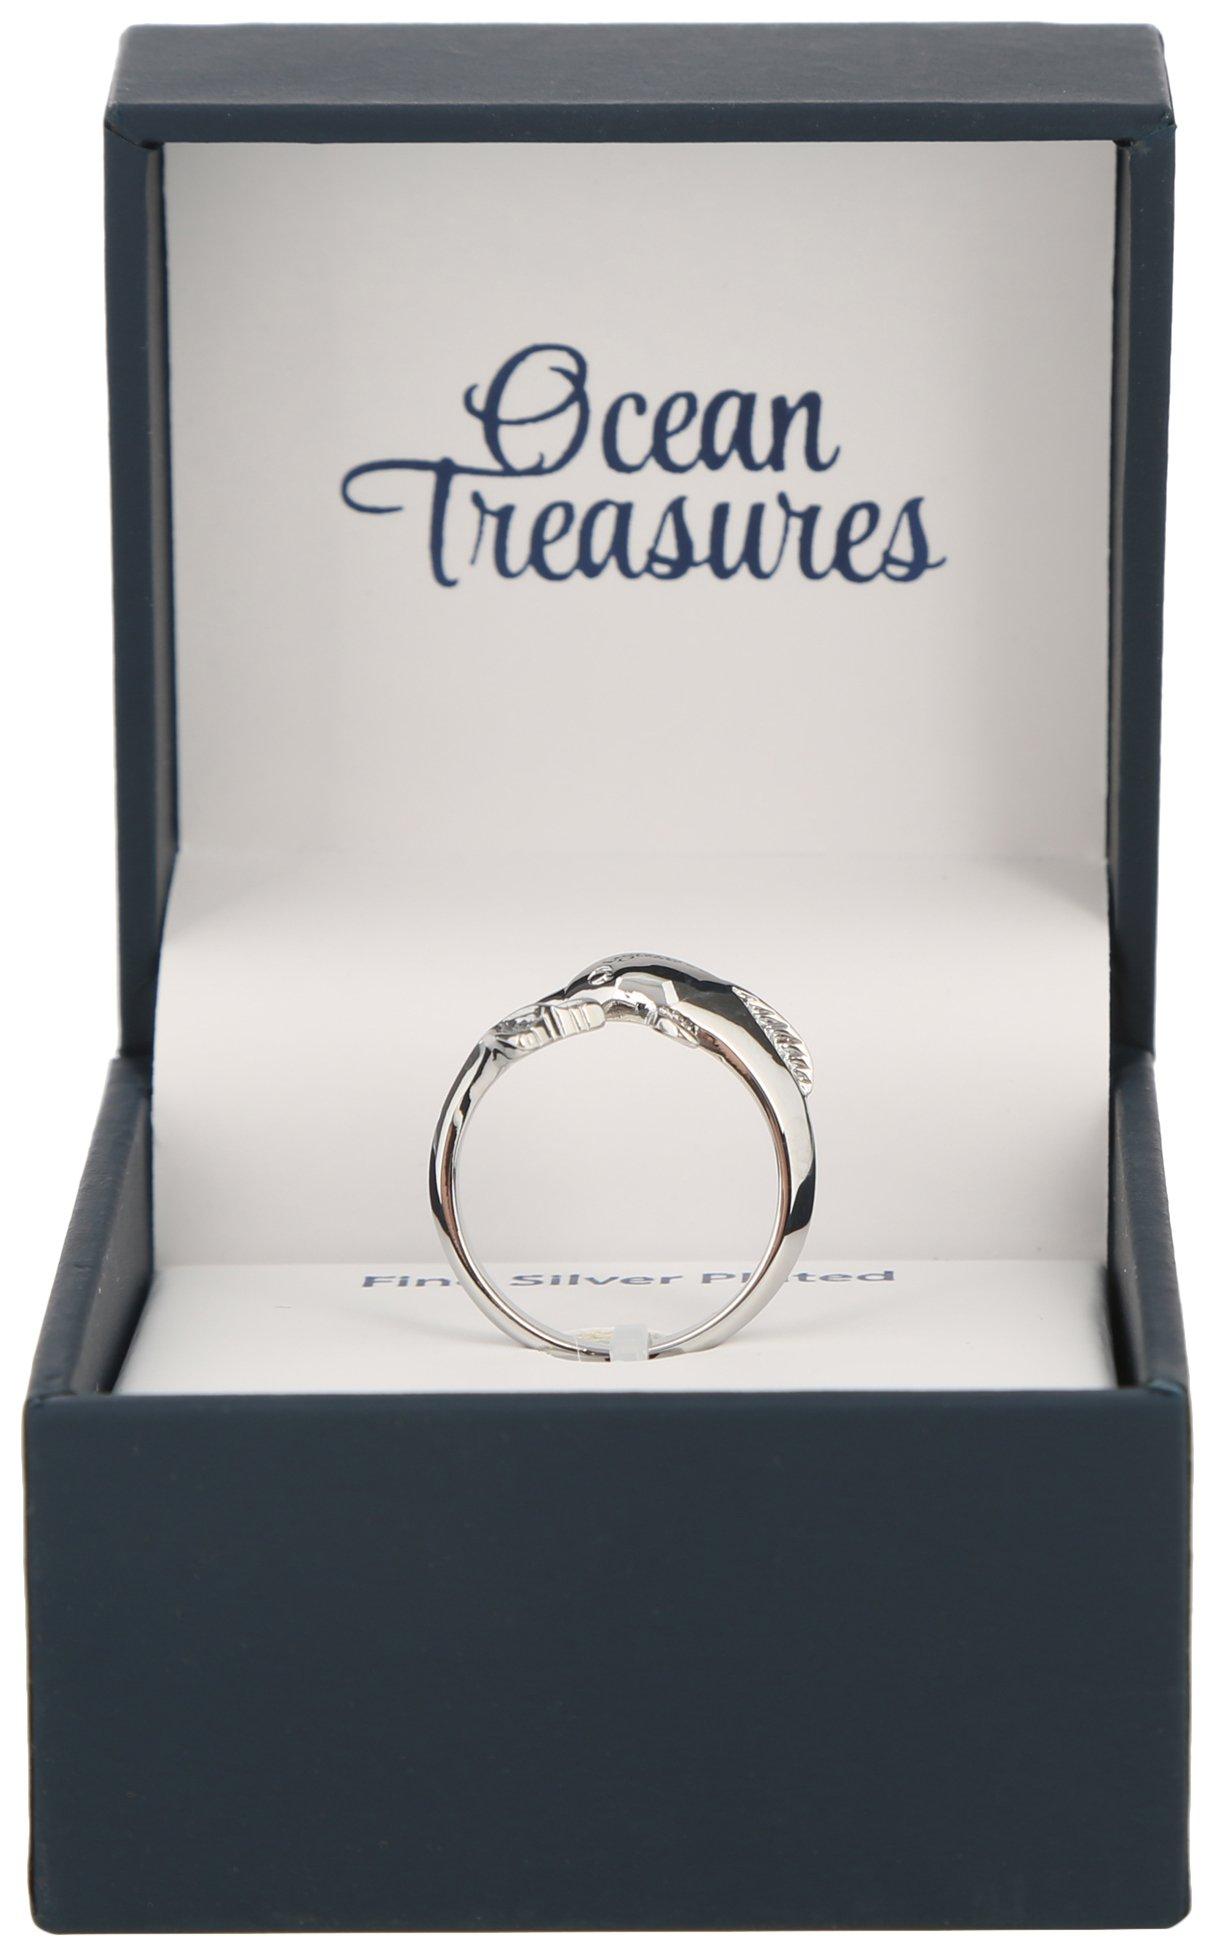 Ocean Treasures Dolphin Wrap Silver Plated Boxed Ring